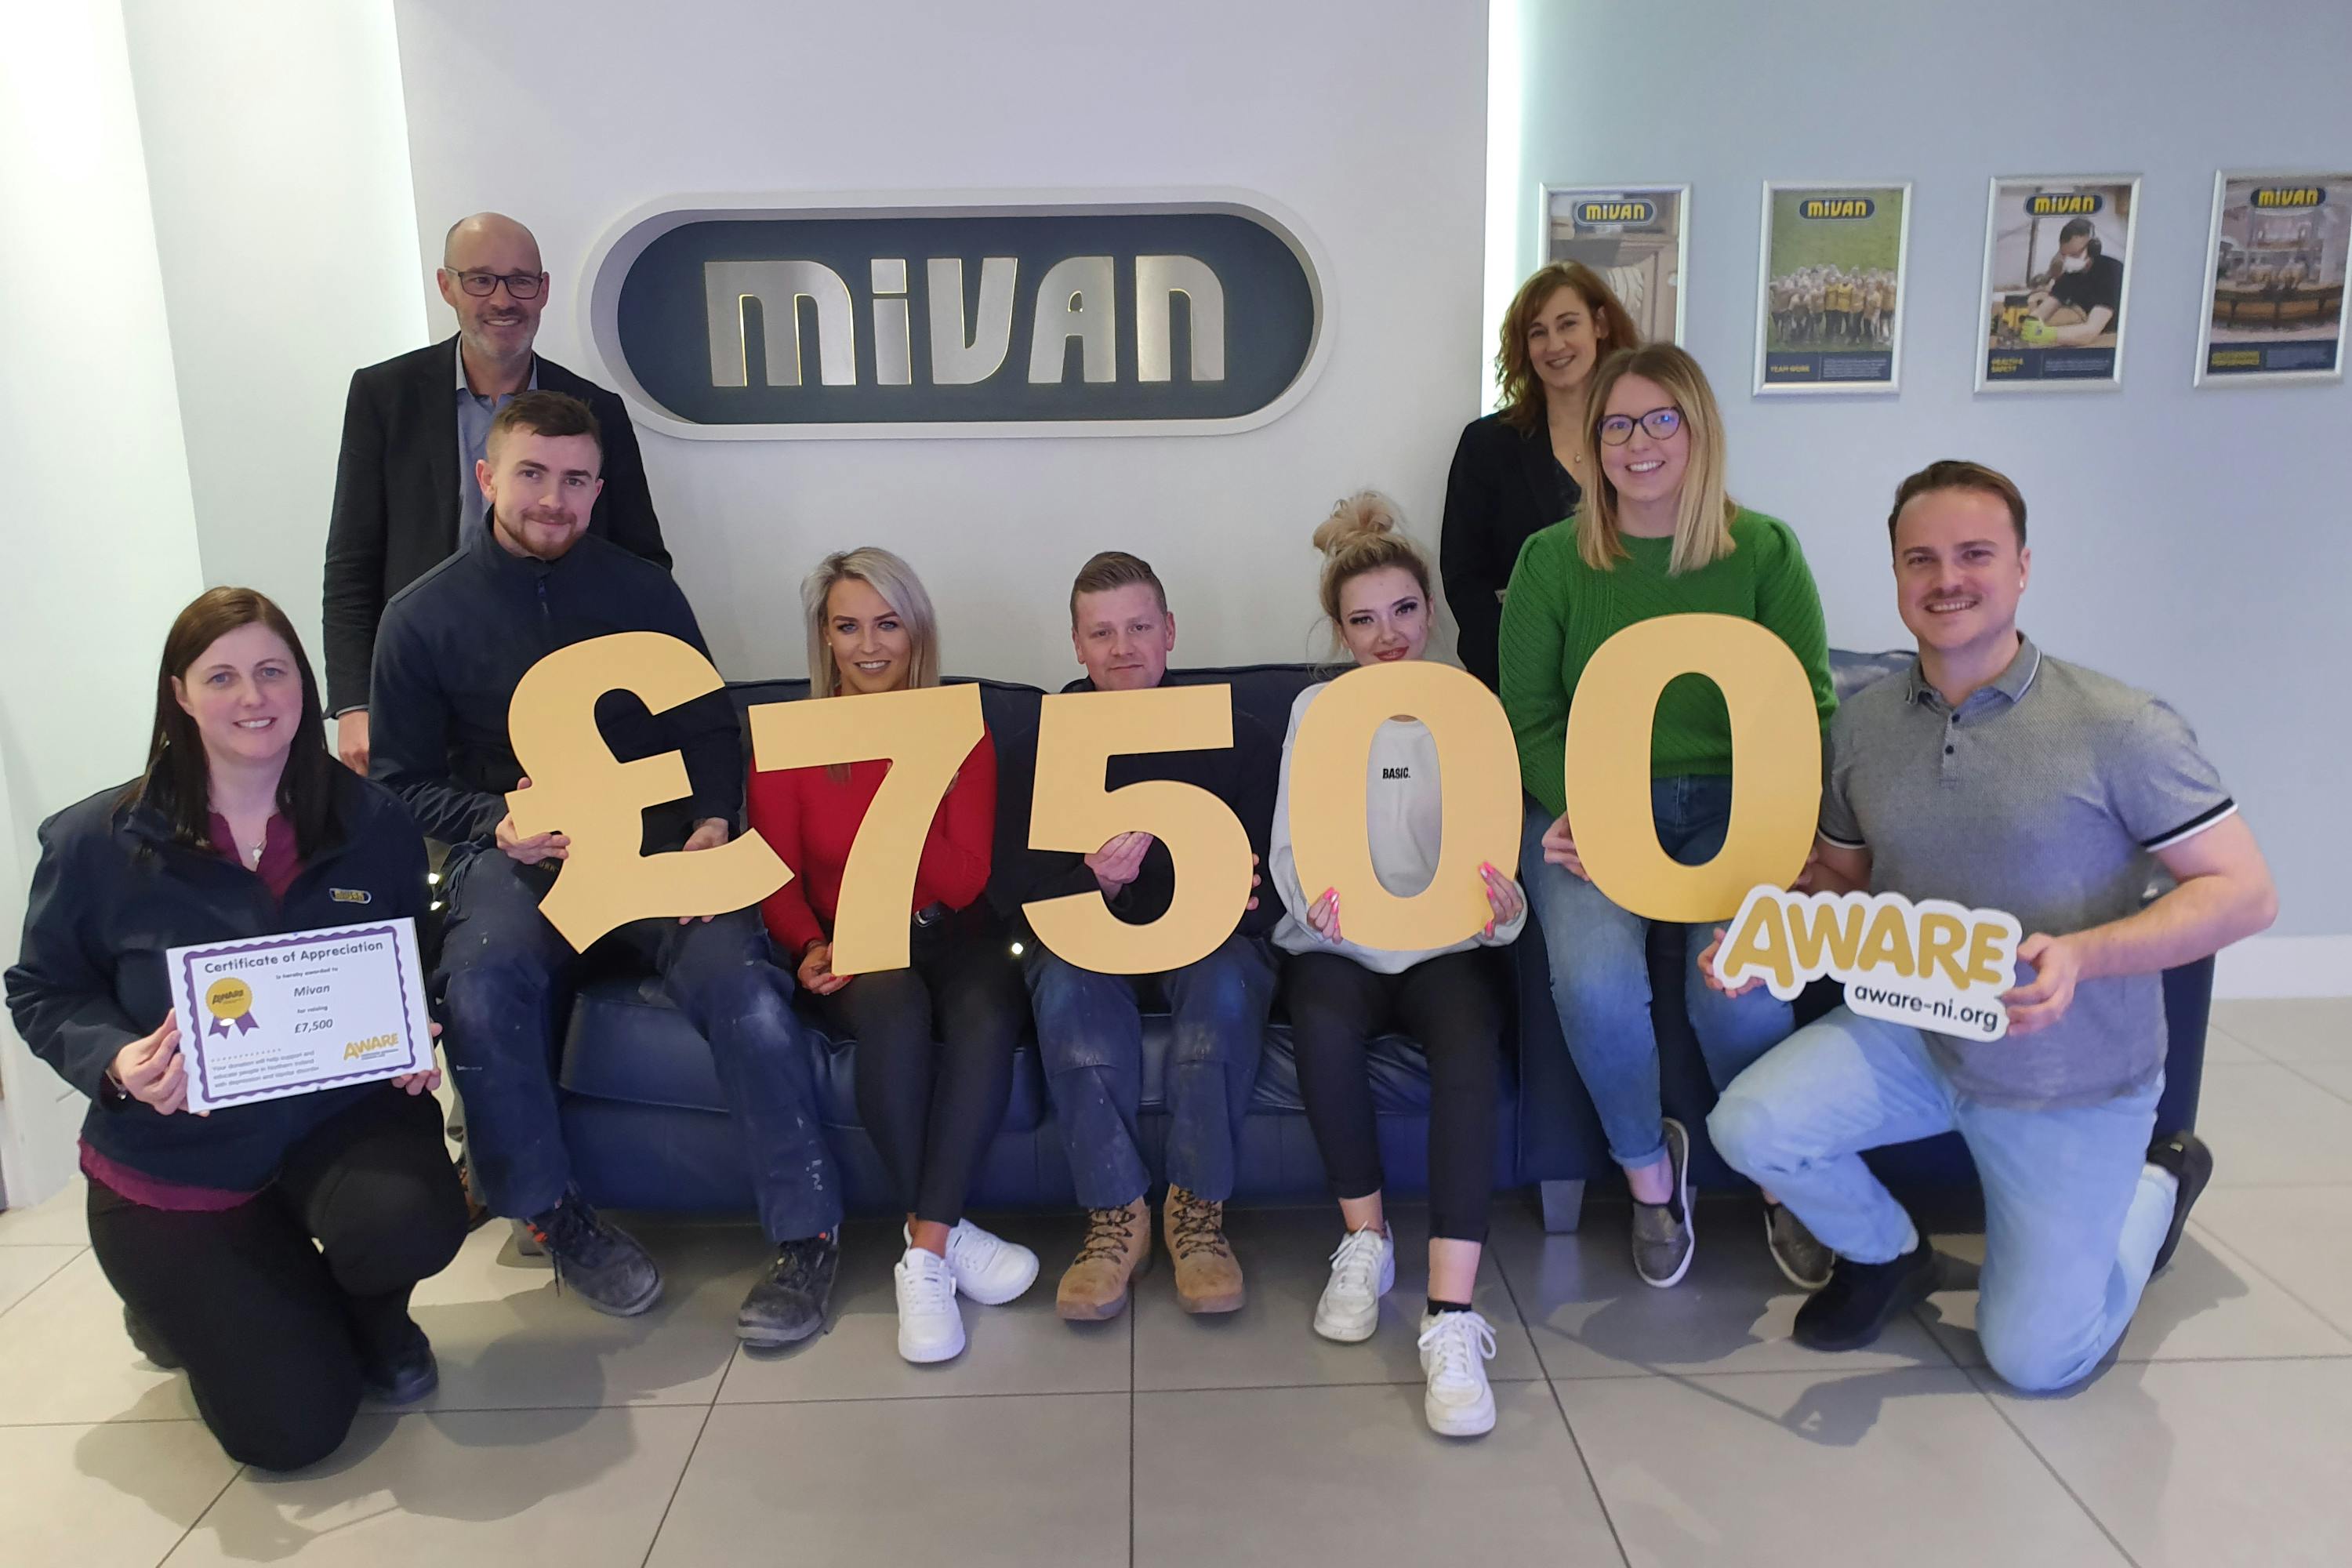 Seven people holding numbers to total £7500 raised for Aware NI, charity partner of the year 2019. 